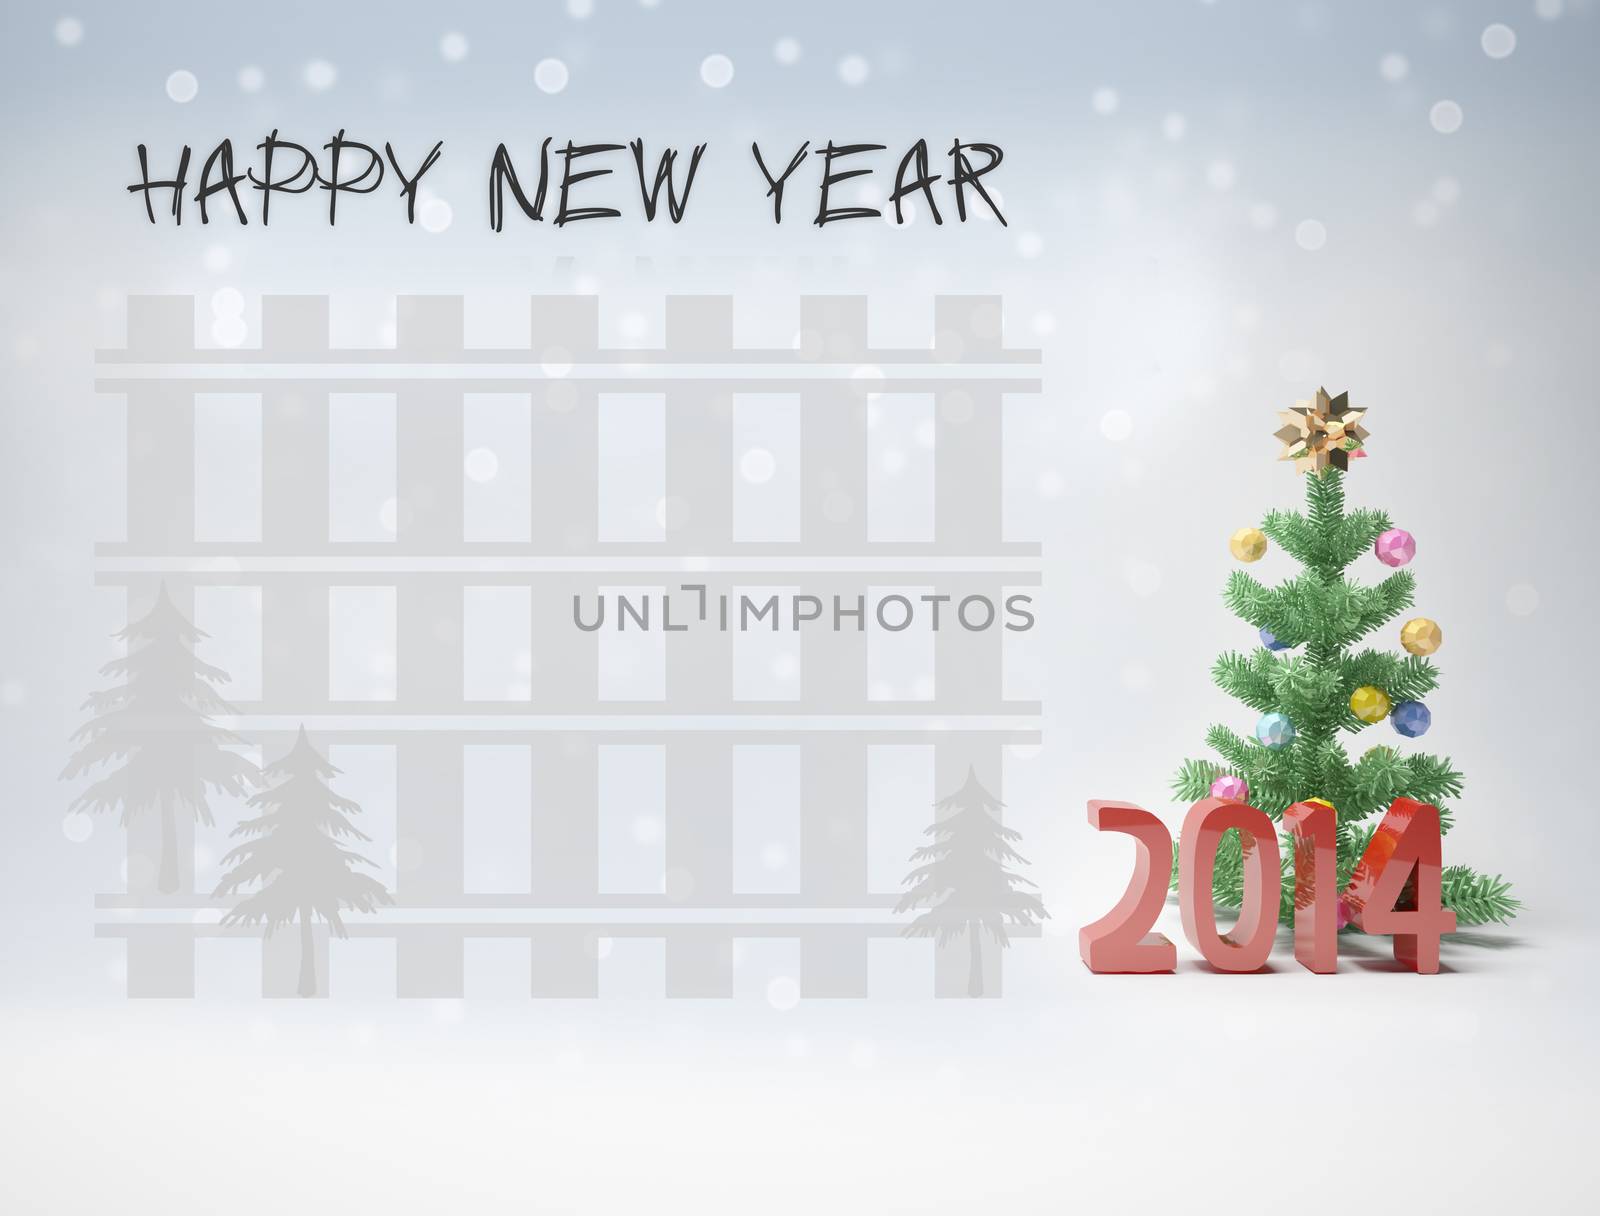 Happy new year 2014 cards by apichart